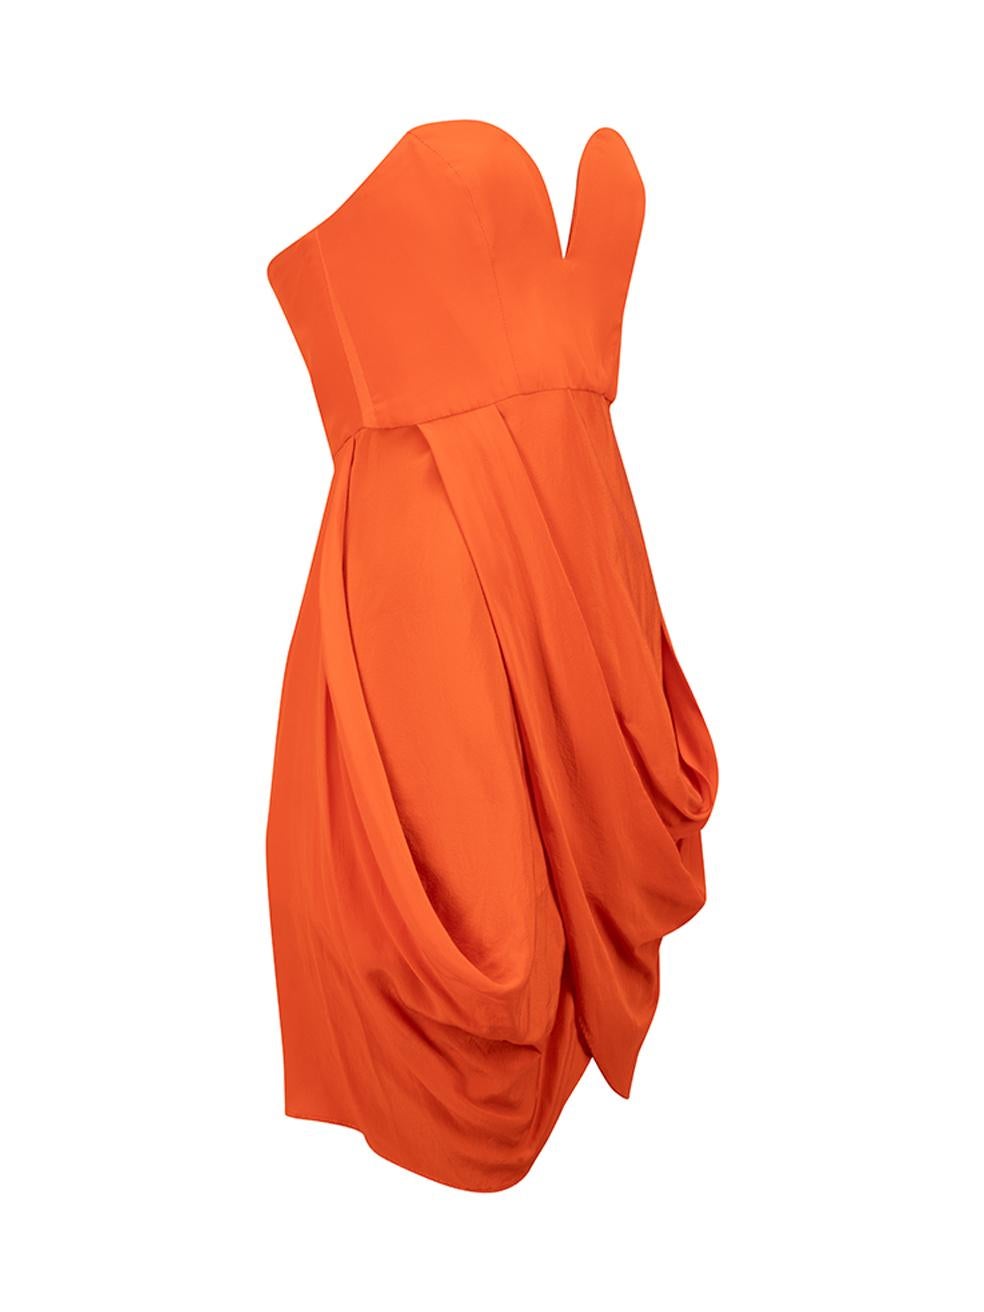 CONDITION is Very good. Hardly any visible wear to dress is evident on this used Zimmermann designer resale item.



Details


Orange 

Silk

Mini dress

Strapless

Sweetheart neckline

Boned bodice

Pleated drape detail on the skirt

Back zip